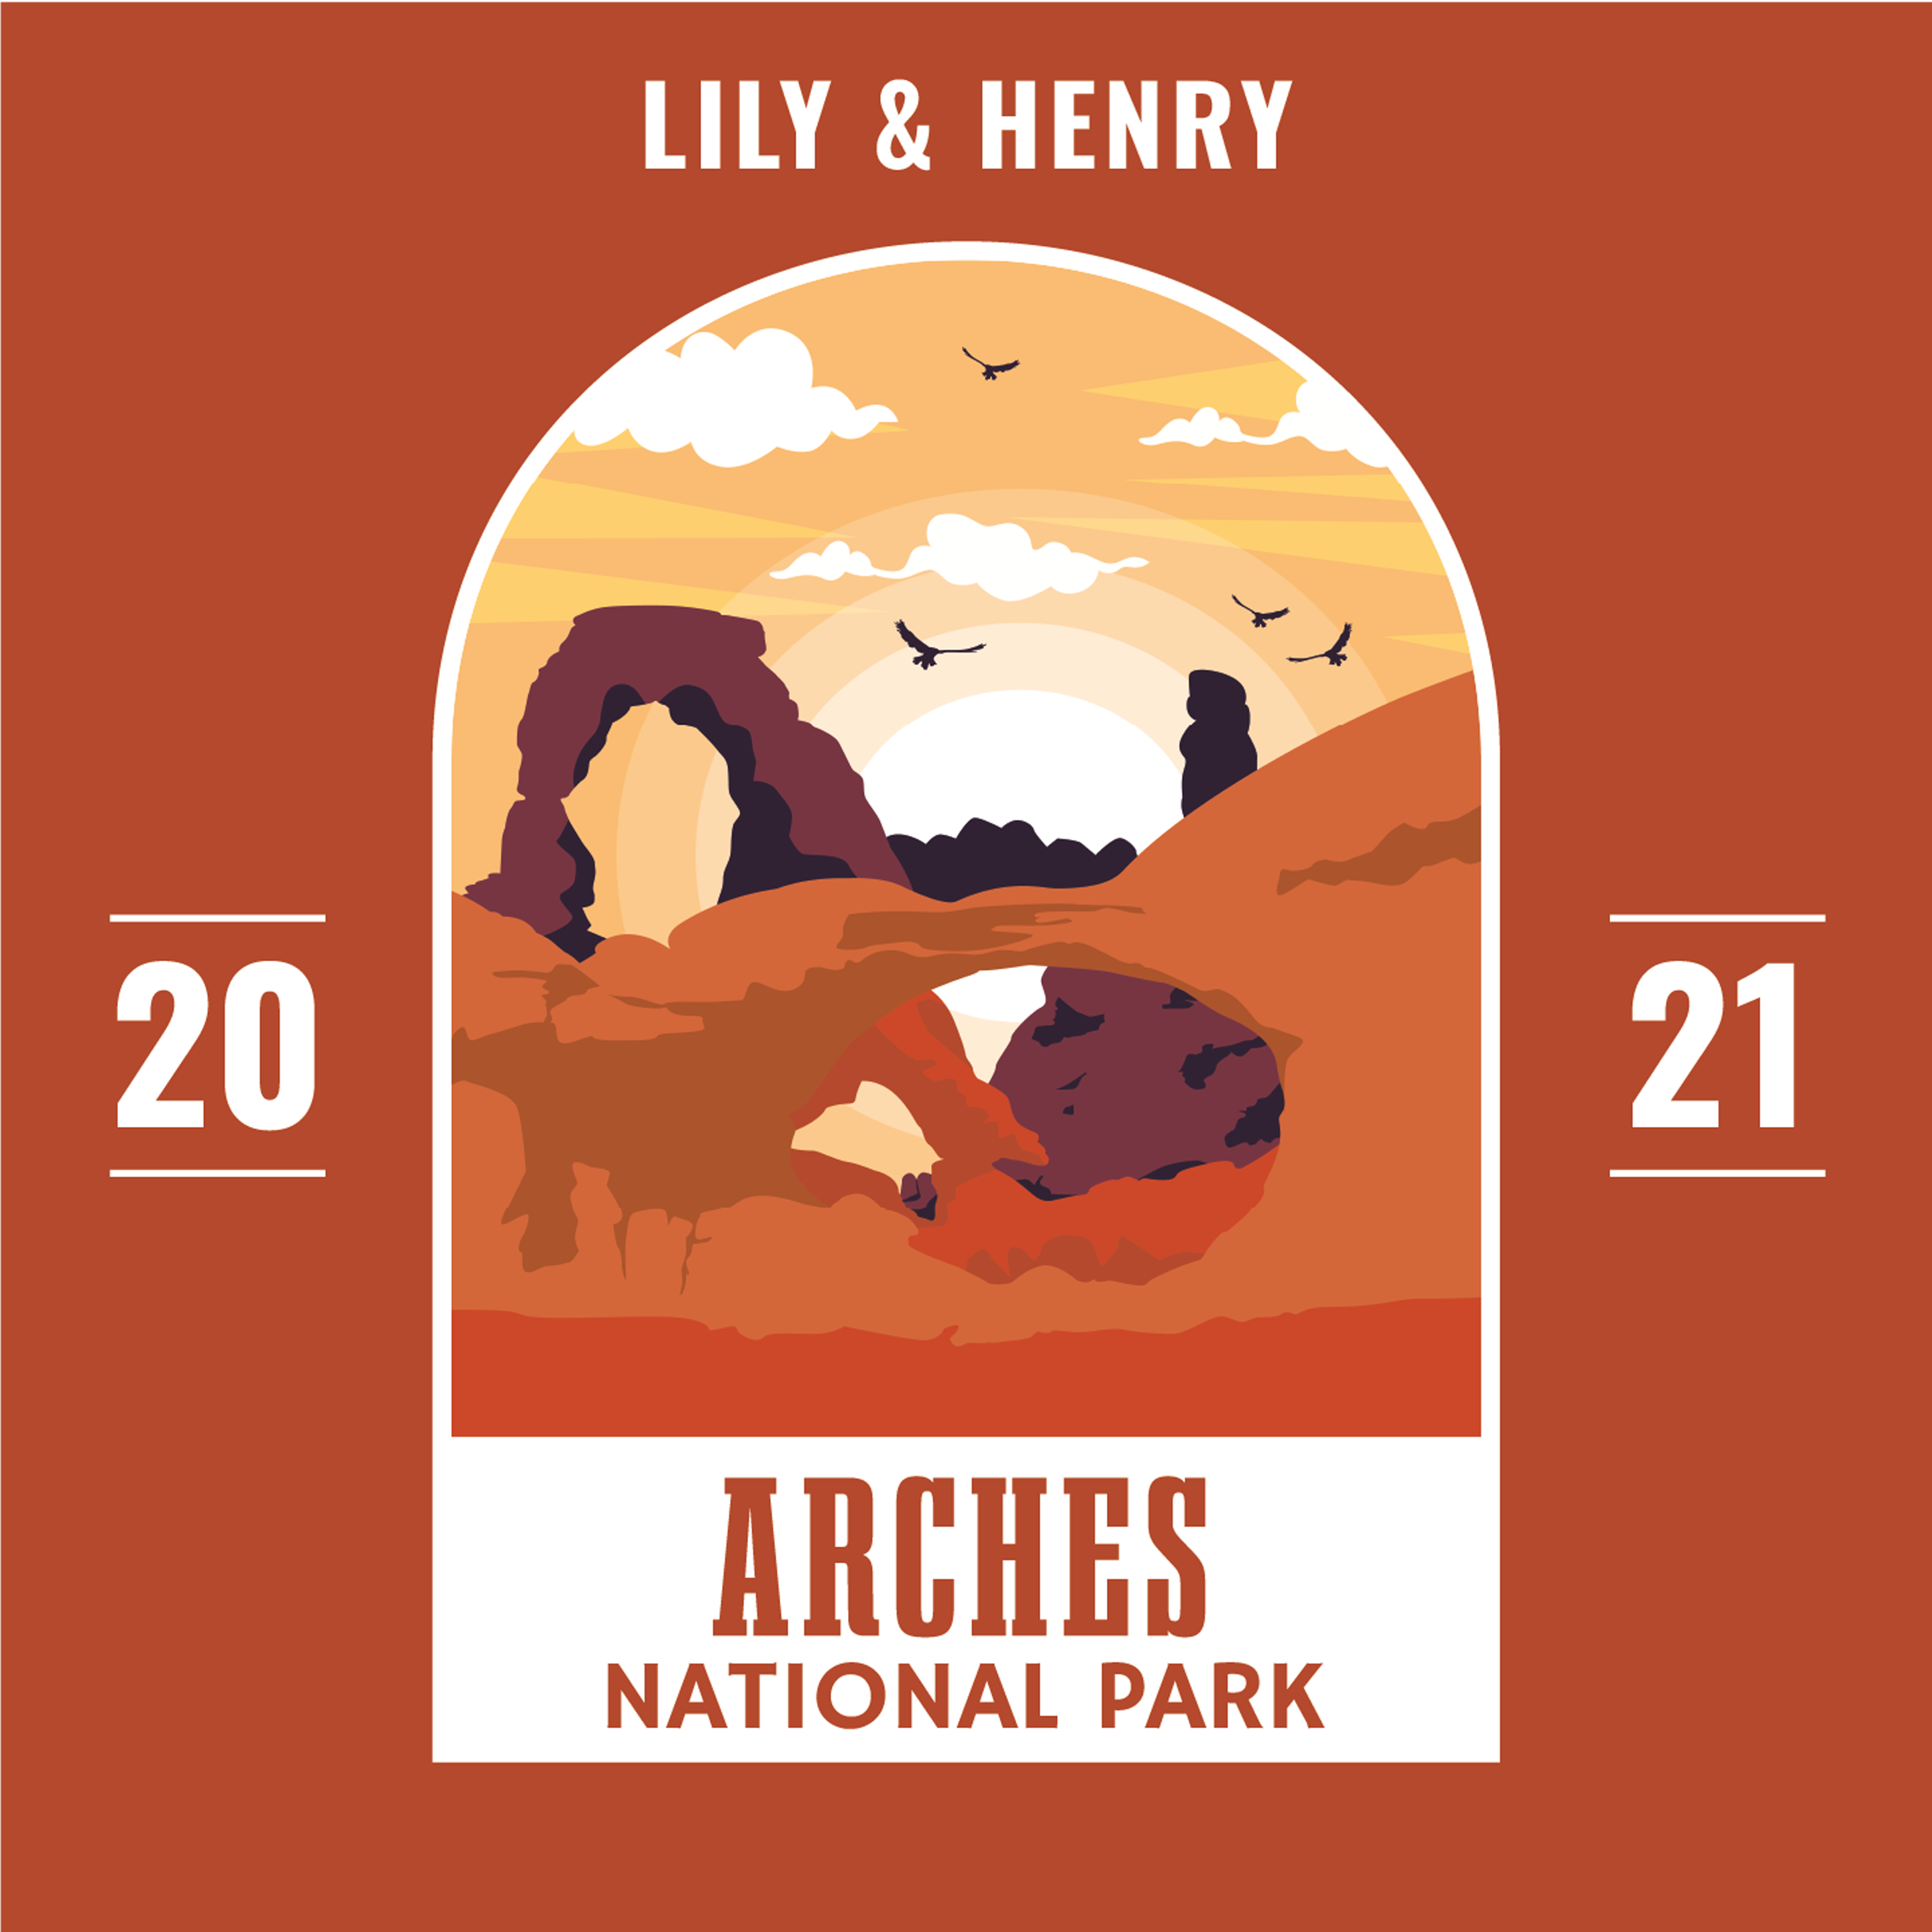 arches-national-park-vacation-design-theme